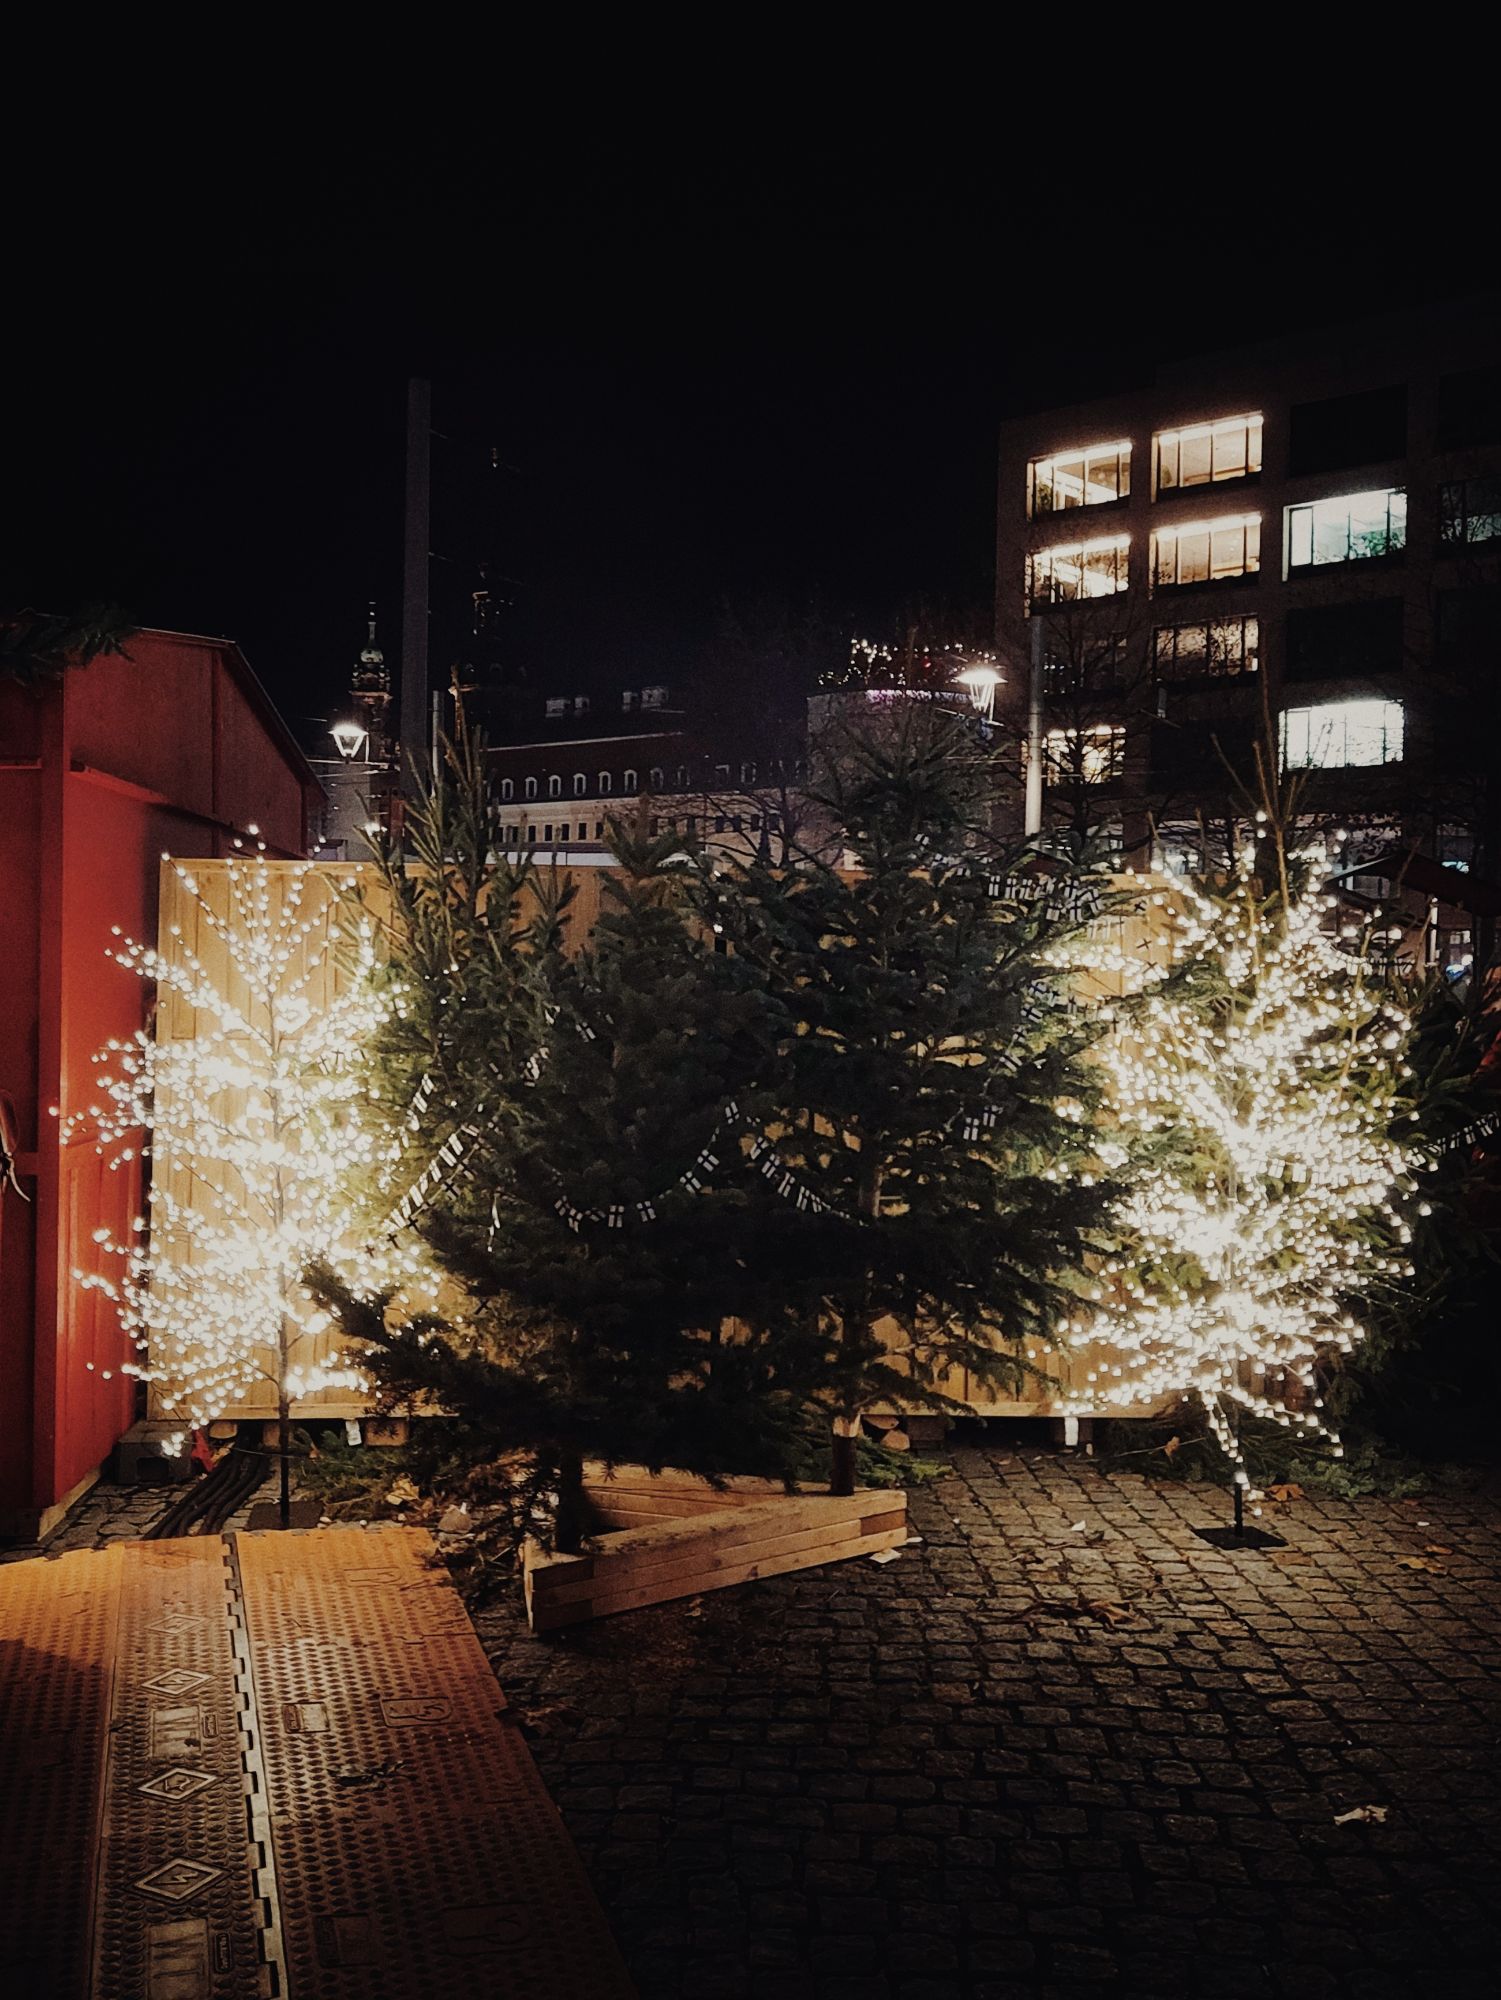 Christmas trees, illuminated, in front of an office building.